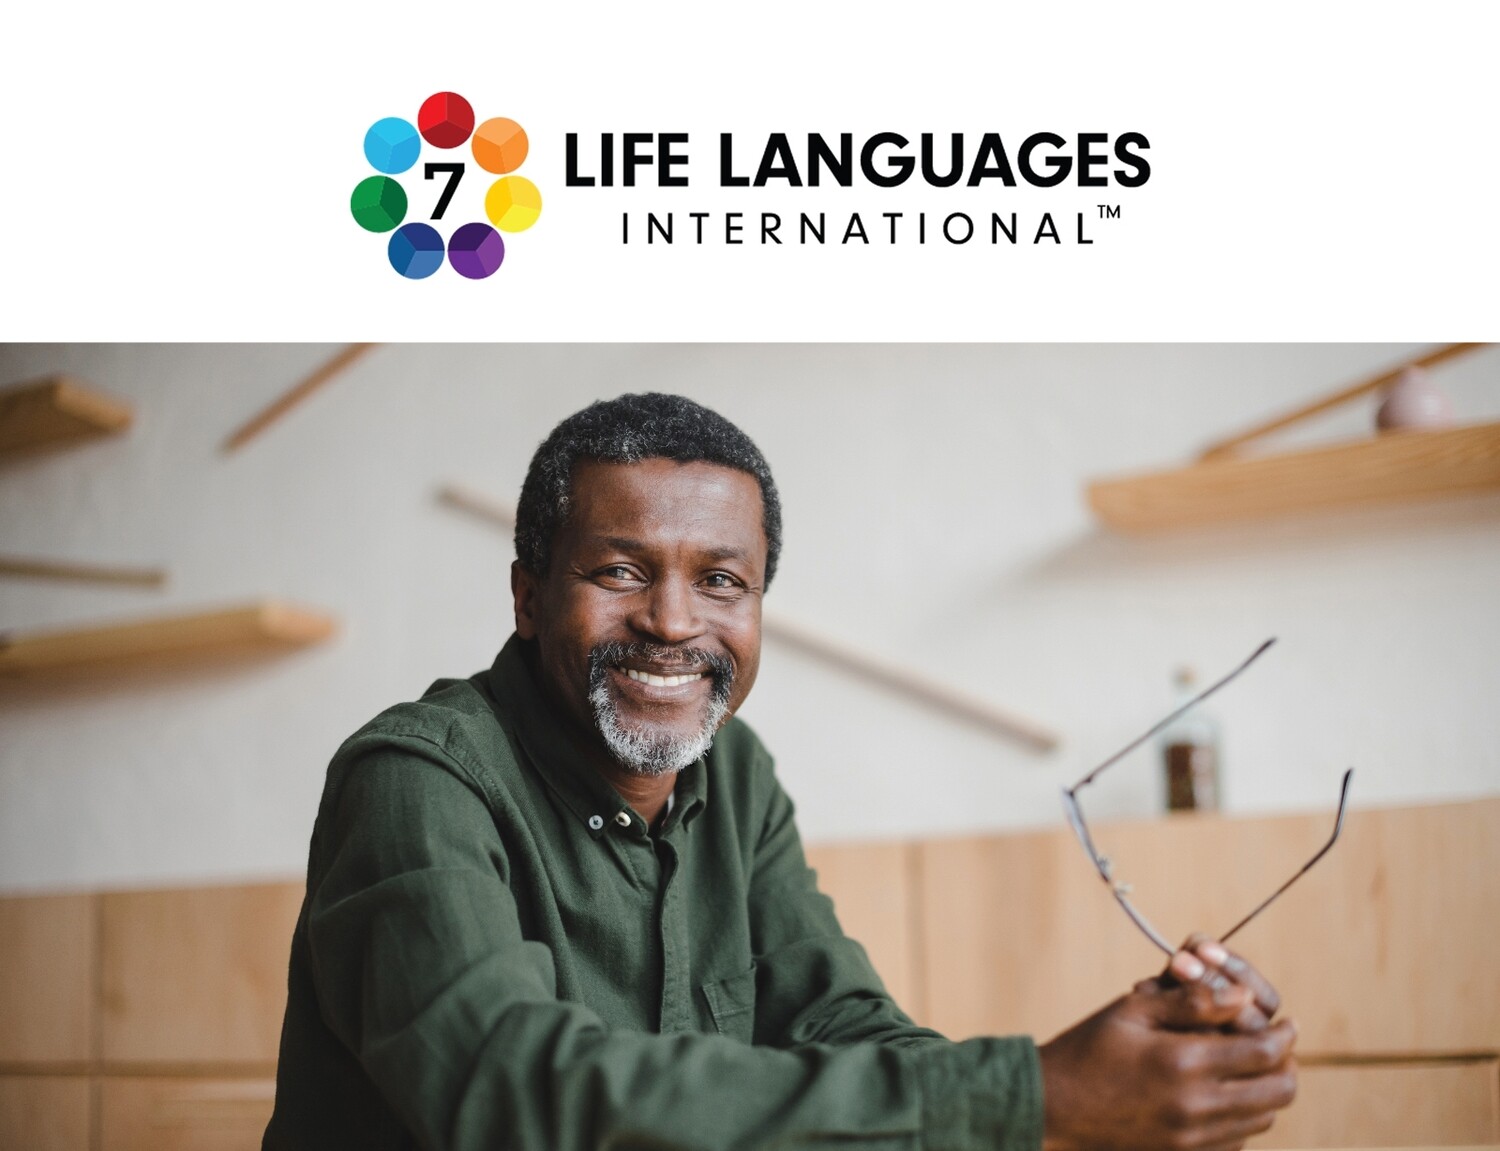 Kendall Life Languages Assessment, Profile and 2 - 1 on 1 Coaching Sessions - EYP